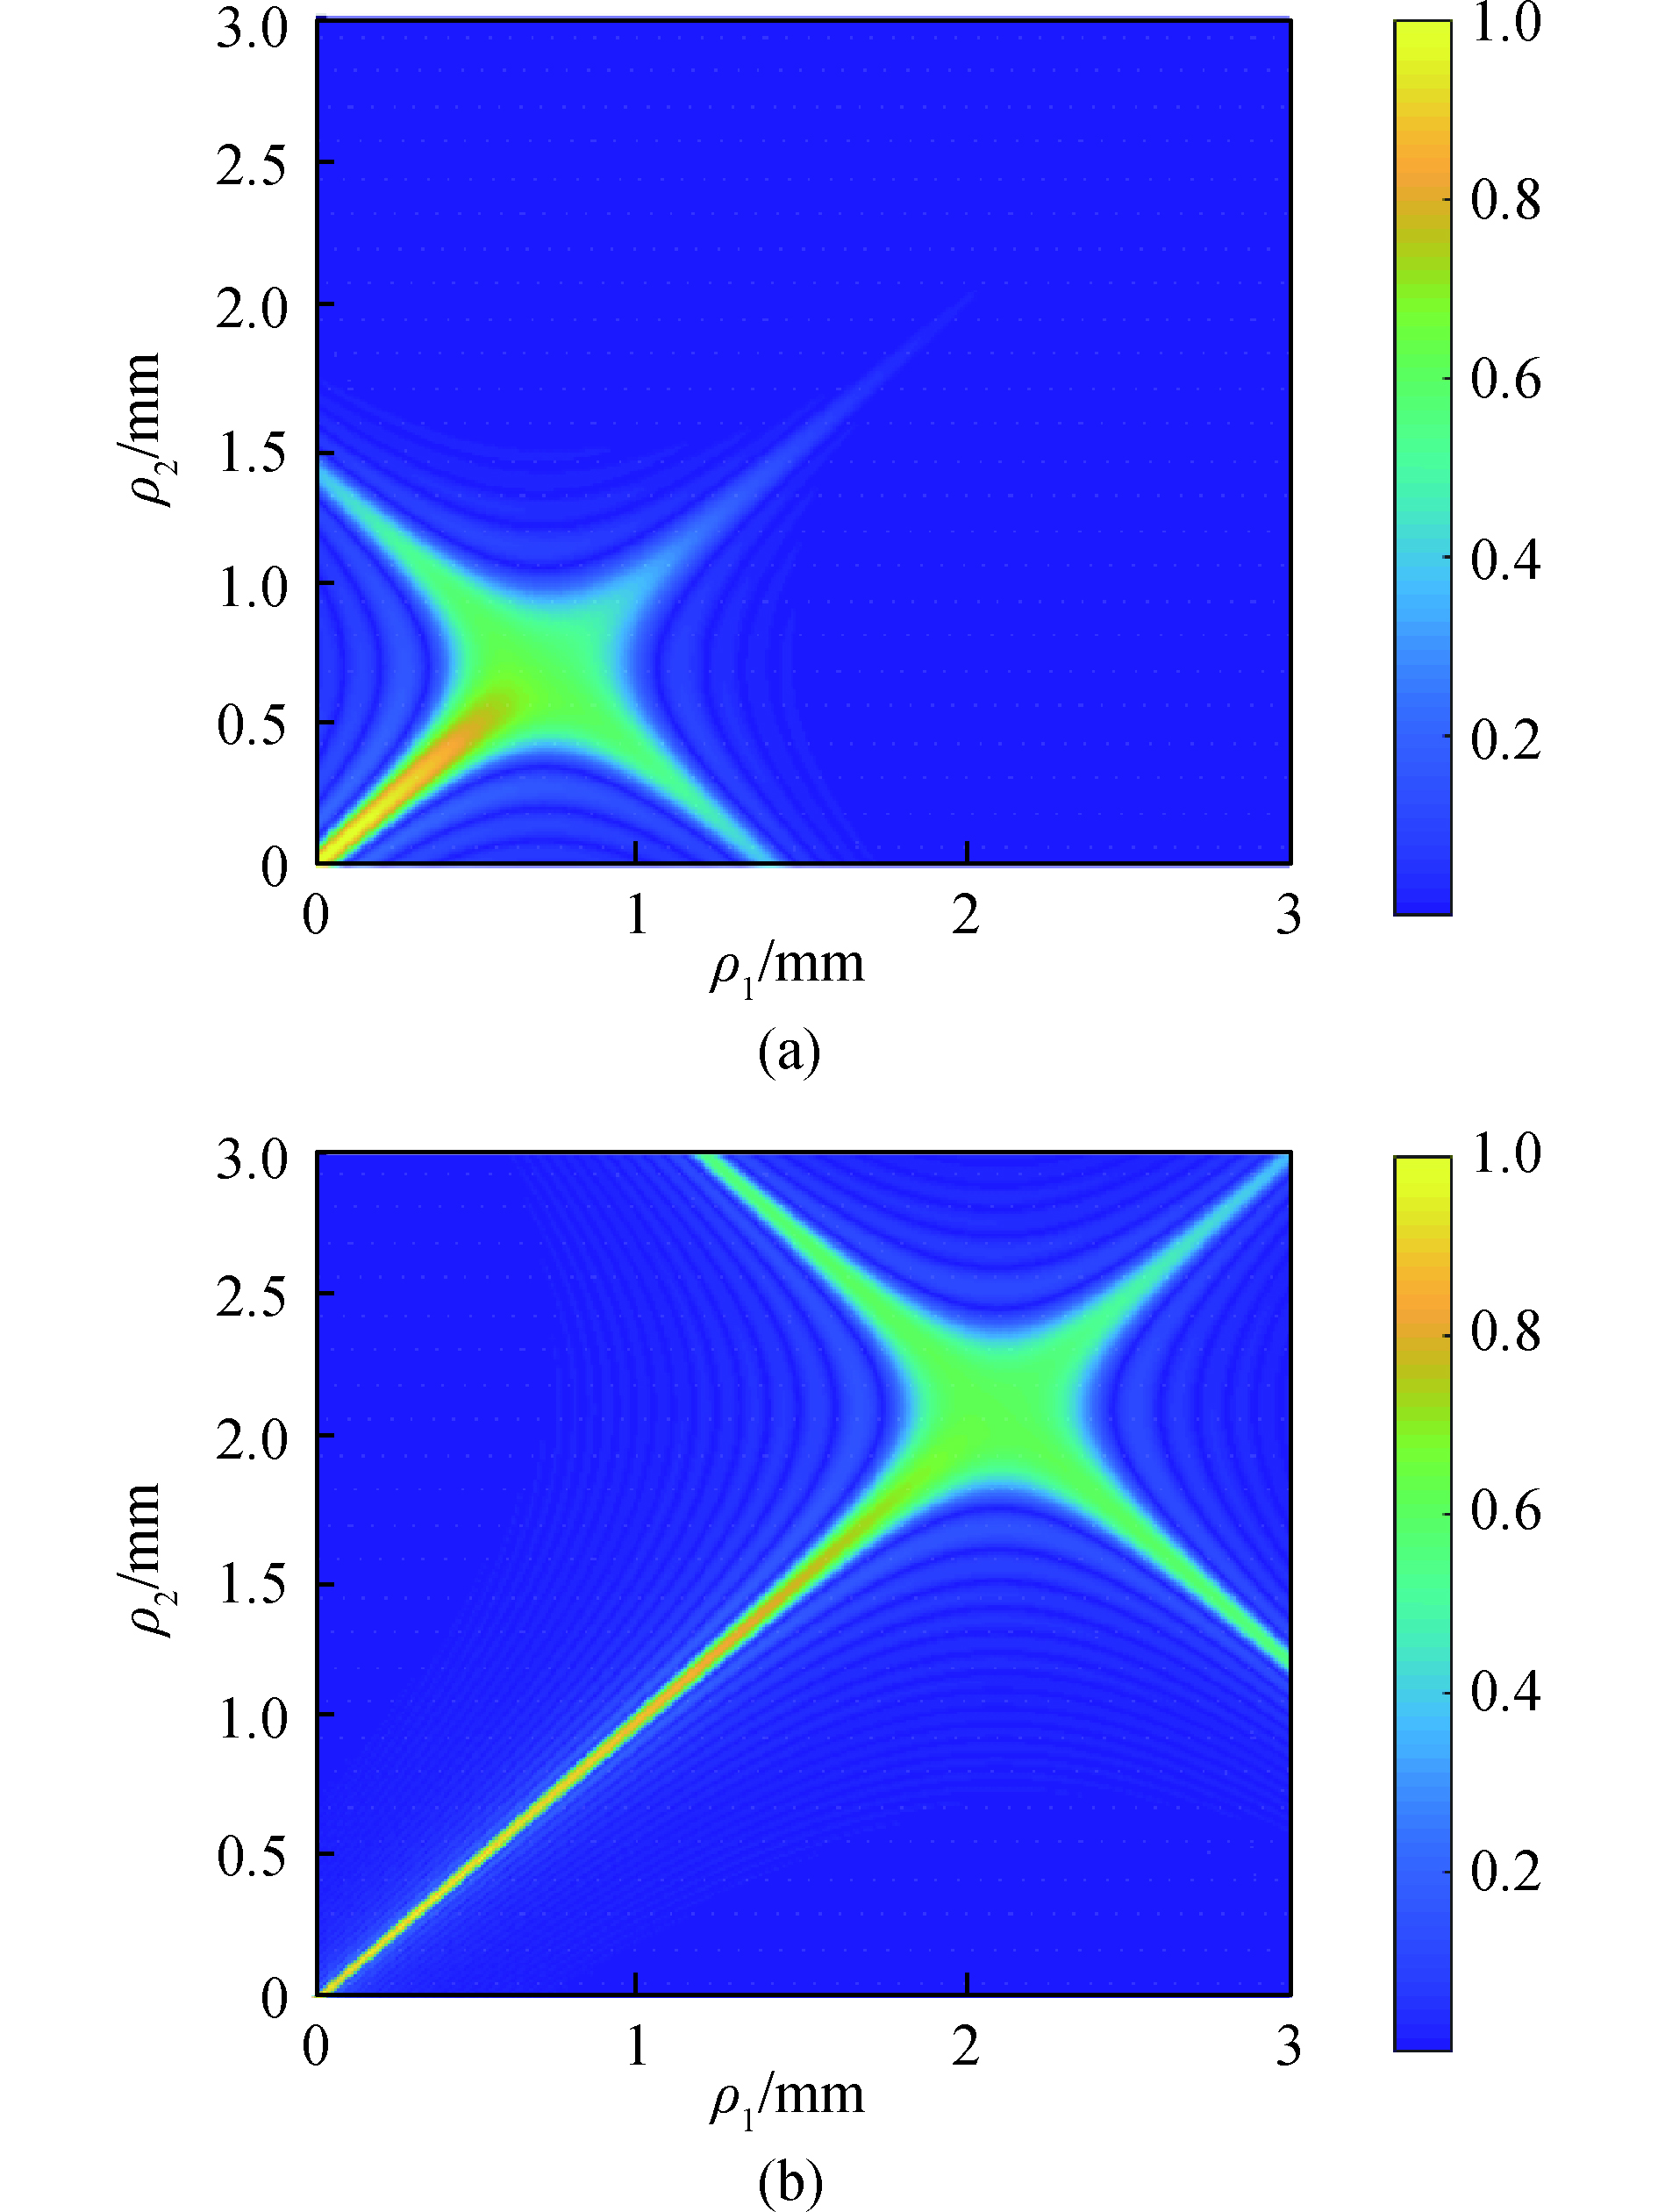 Cross-spectral density under different root-mean-square width